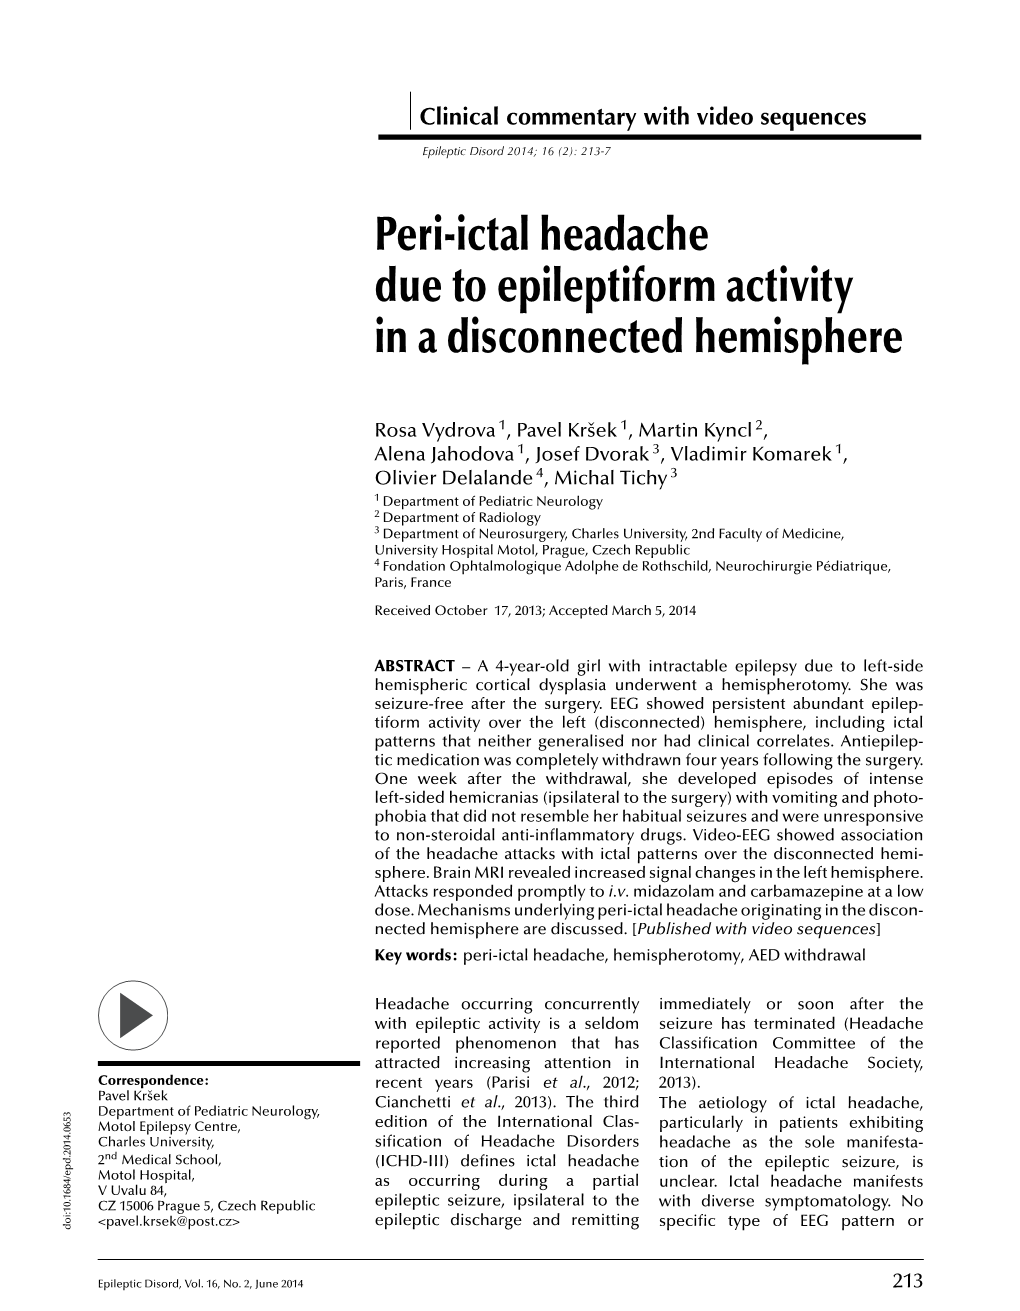 Peri-Ictal Headache Due to Epileptiform Activity in a Disconnected Hemisphere